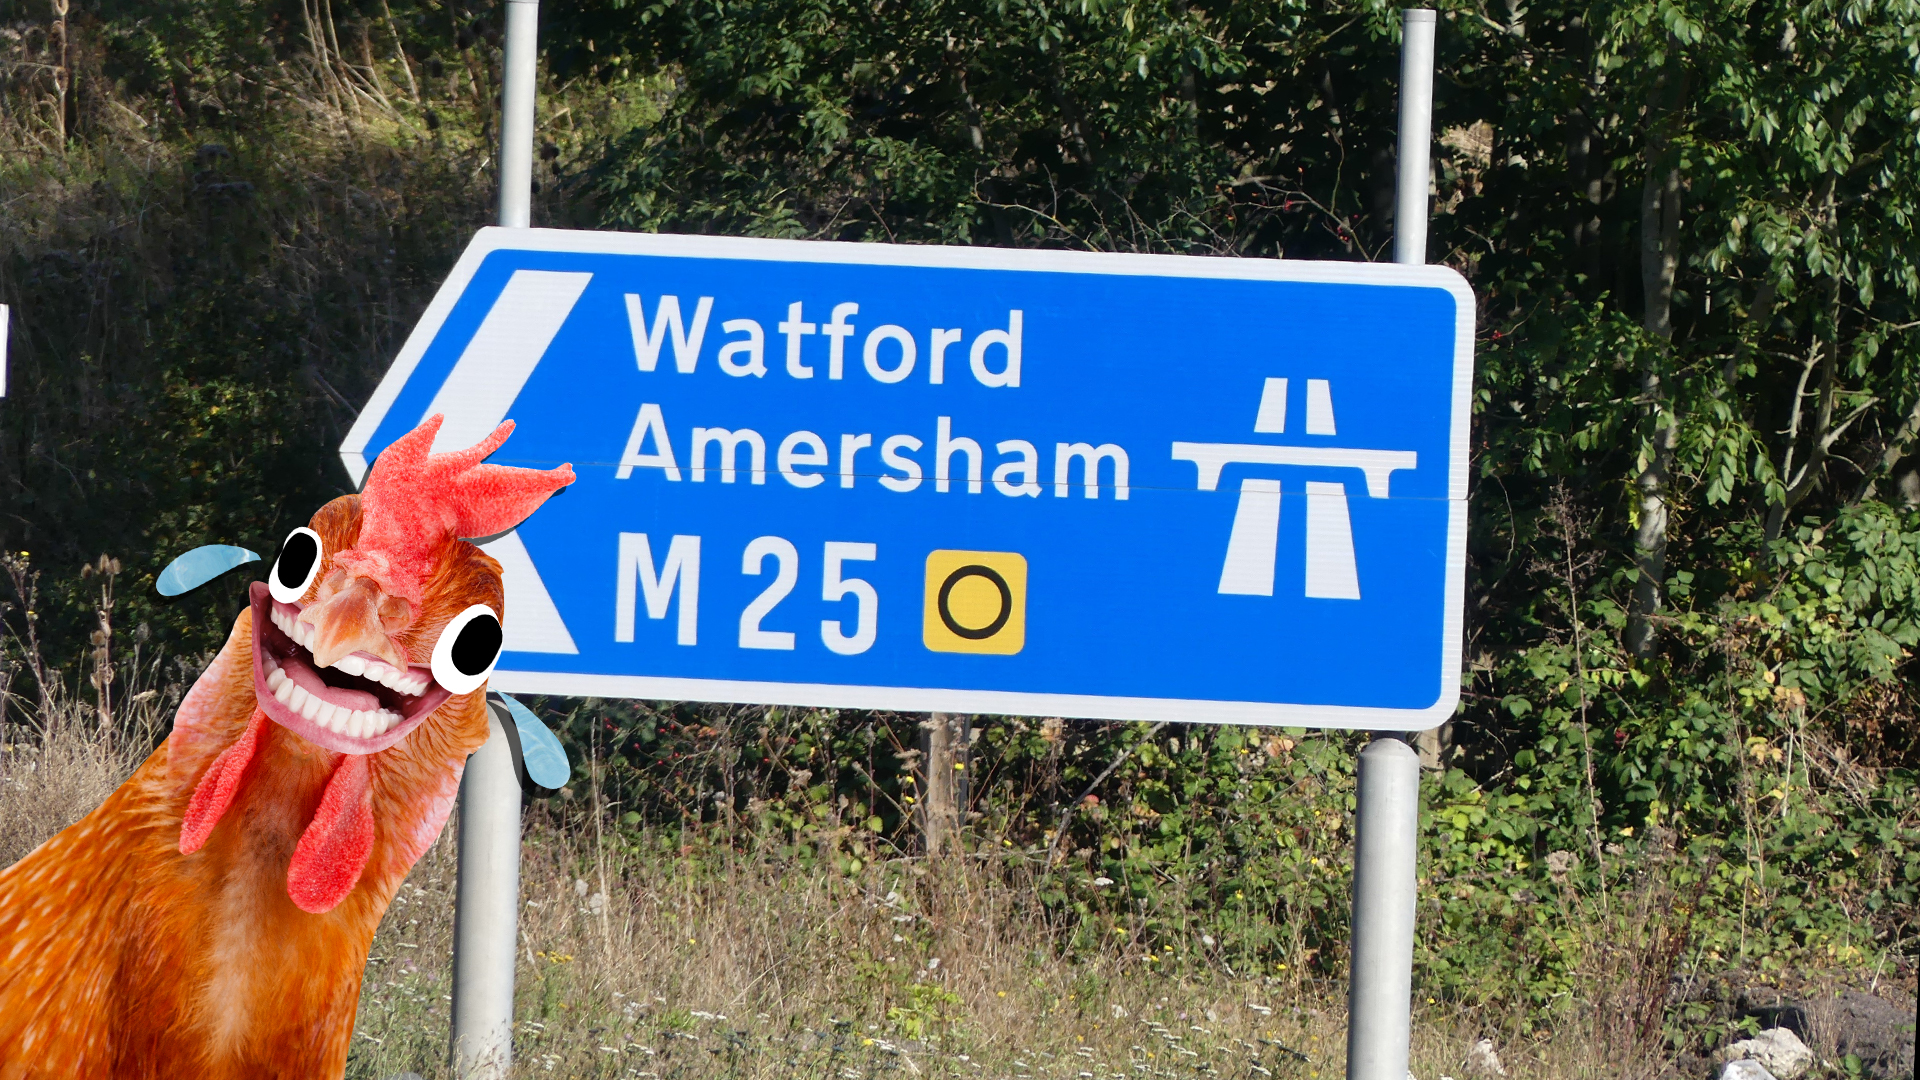 A road sign pointing to Watford